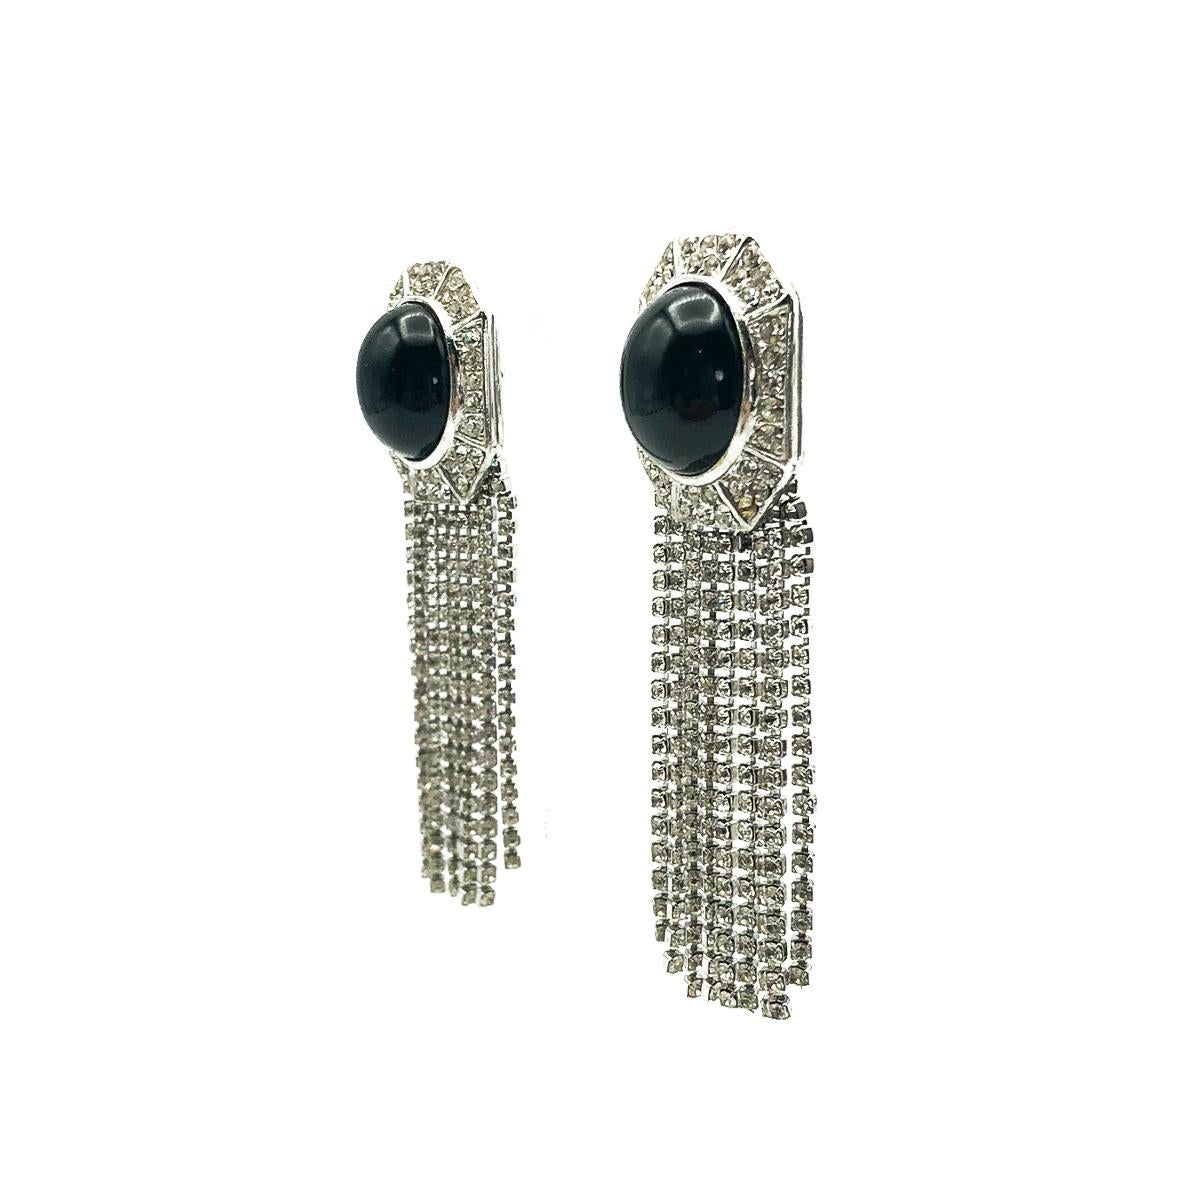 A spectacular pair of Art Deco inspired vintage Ciner monochrome fringe earrings. Boasting the incredible quality and style Ciner, NYC is renowned for over the last century. Featuring a large dramatic cabochon stone atop a stunning fringe of